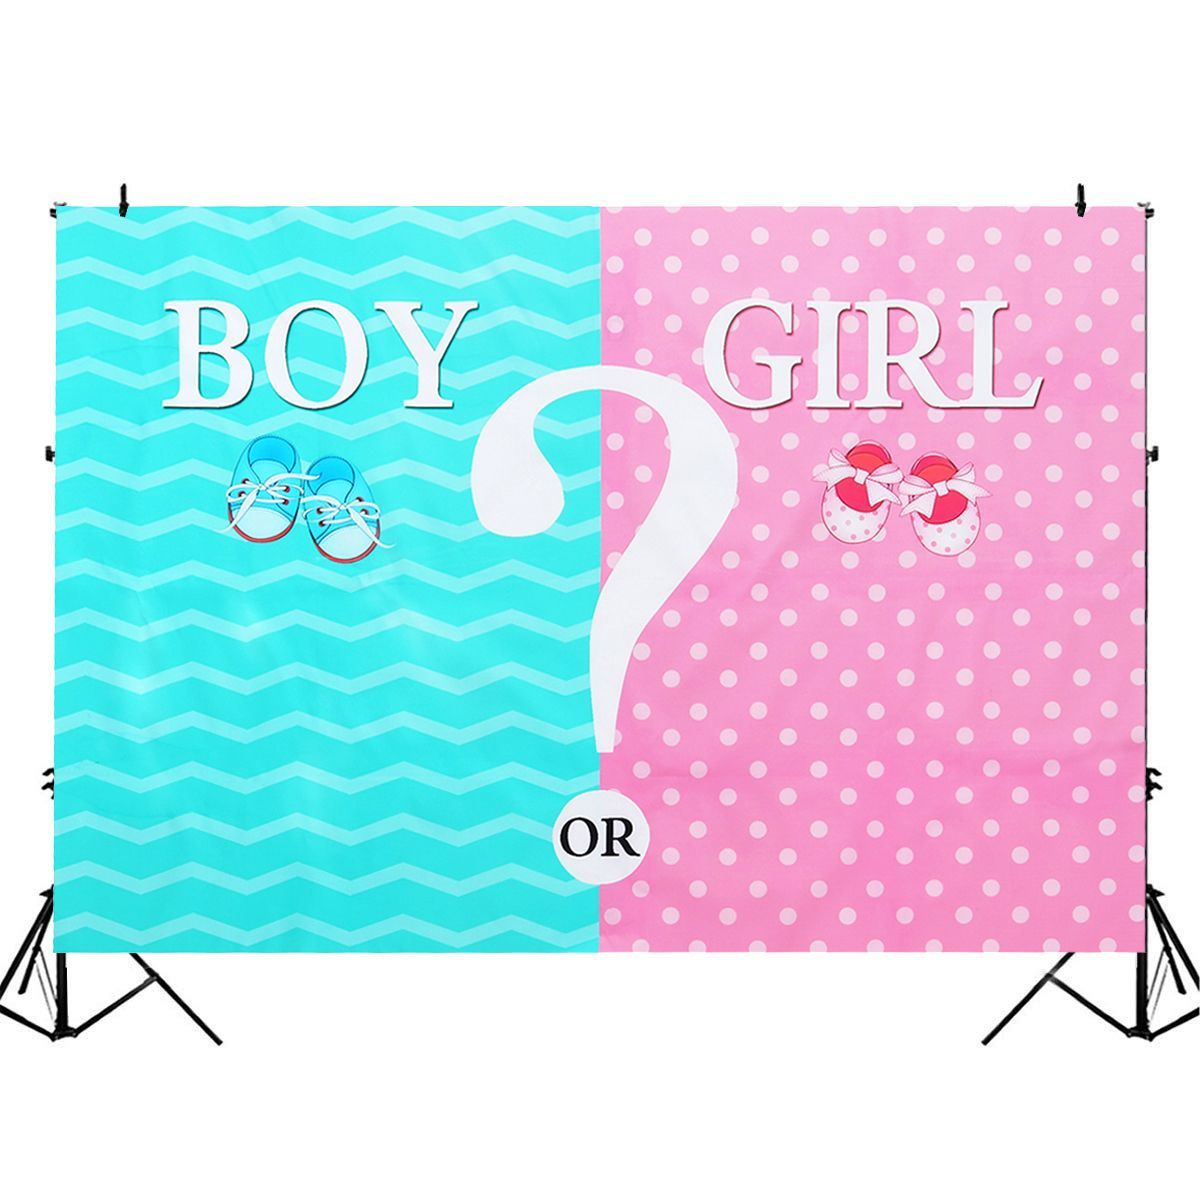 5x3FT-7x5FT-Girl-or-Boy-Theme-Photography-Backdrop-Studio-Prop-Background-1601202